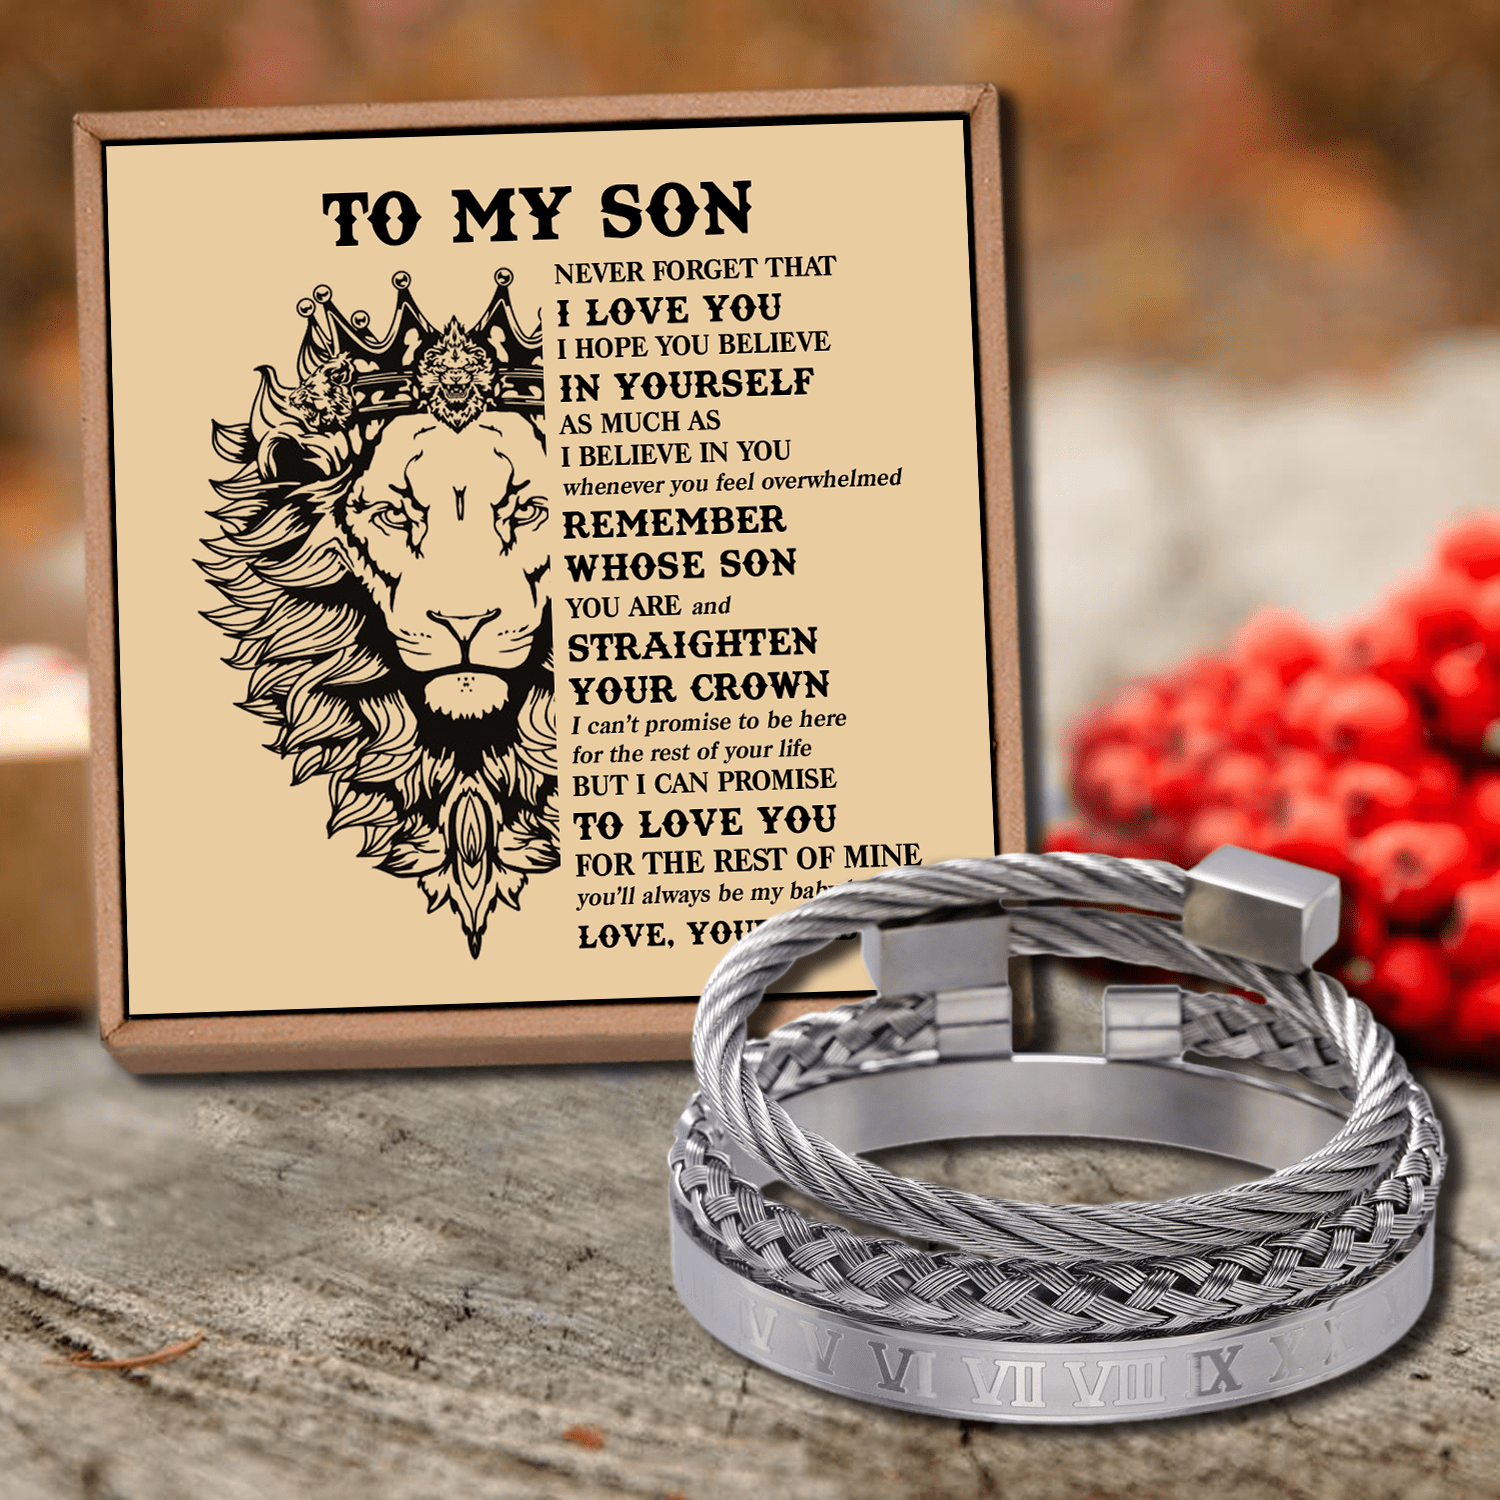 Bracelets Dad To Son - Believe In Yourself Roman Numeral Bracelet Set Silver GiveMe-Gifts